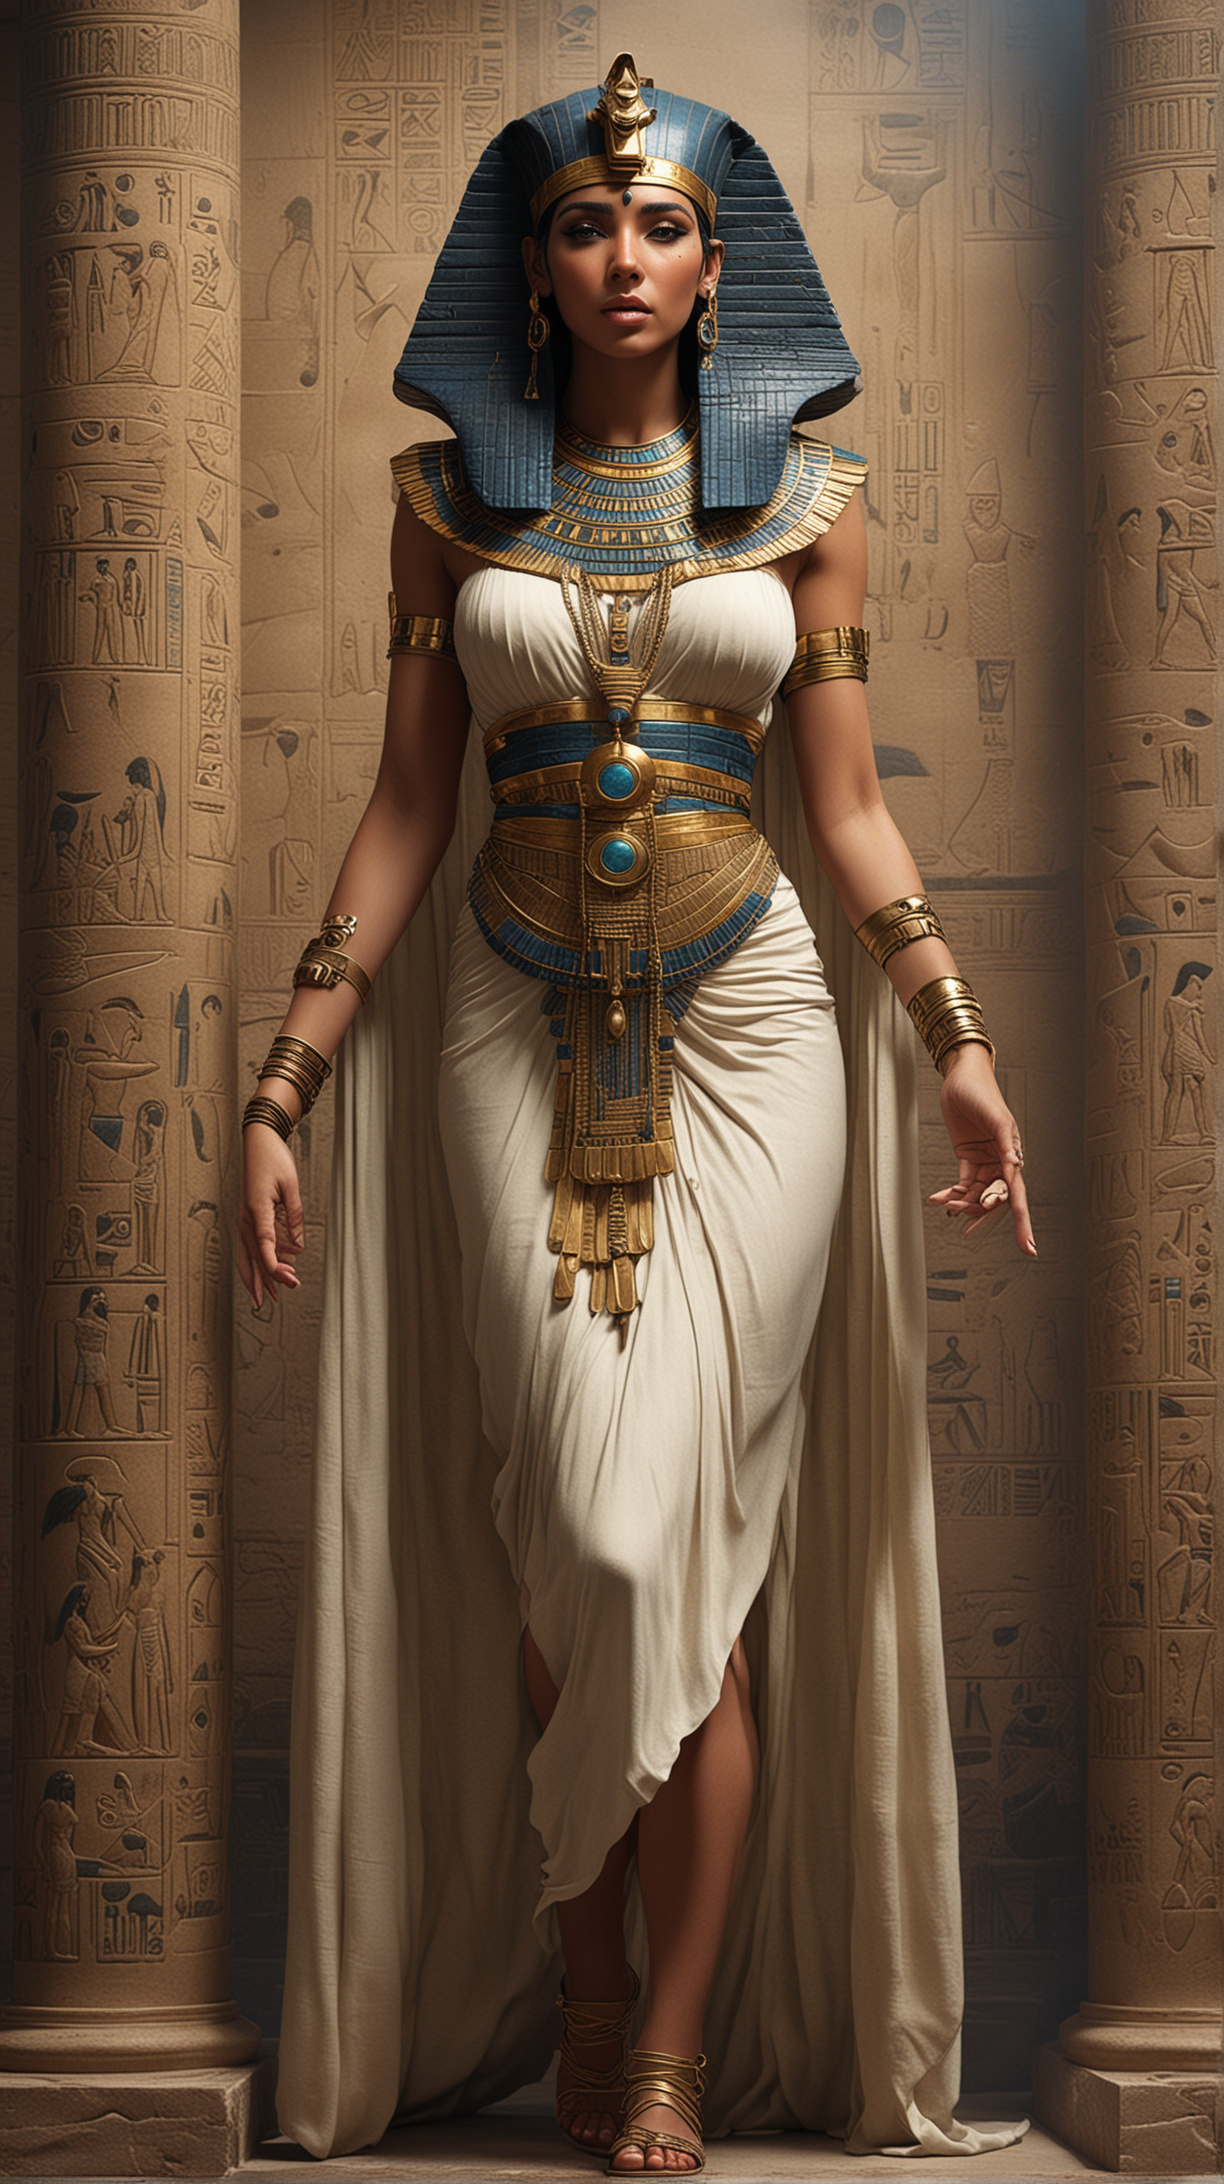 Create a unique image of majestic Cleopatra embodying her power, beauty, and mystery, immersing in the atmosphere of ancient Egypt using symbols, architectural elements, and clothing styles of that era. Hyper realistic